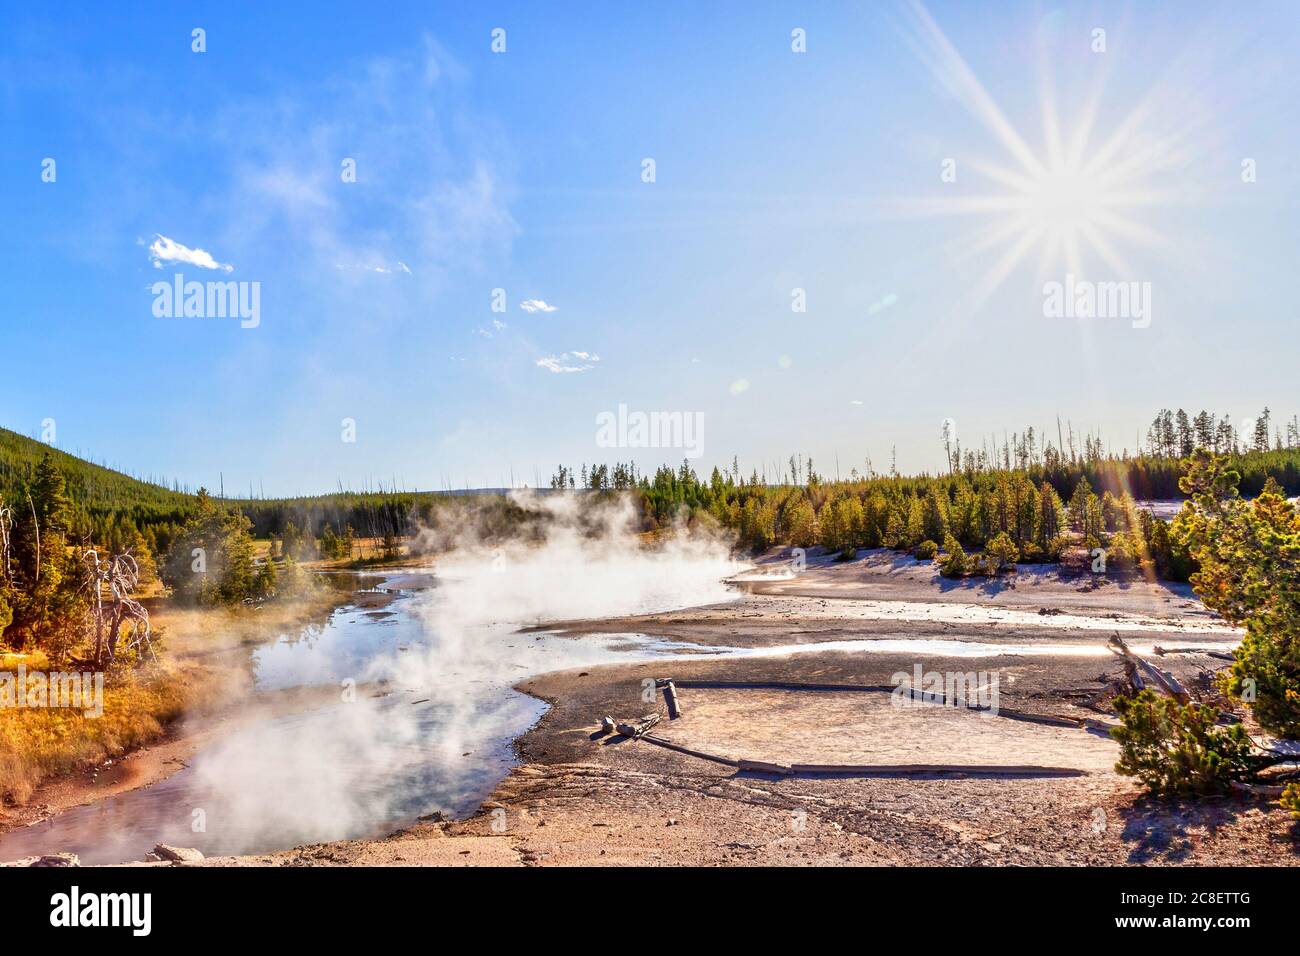 Page 2 - Steam High Resolution Stock Photography and Images - Alamy